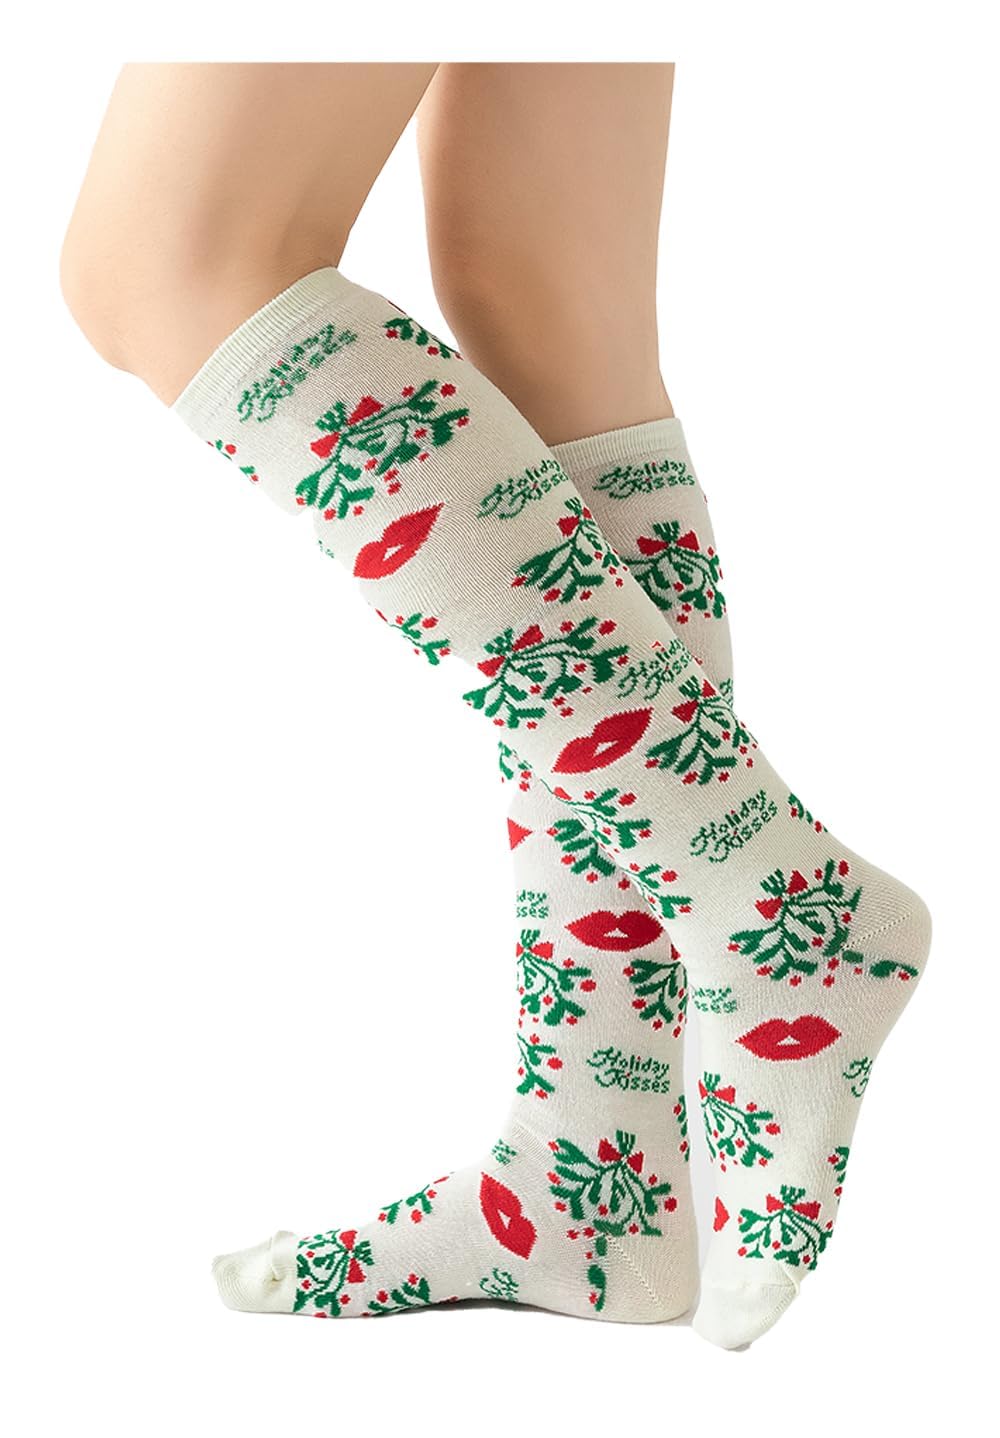 12 Pair, Knee High Holiday X-Mas Socks, 12 Different Designs, Christmas Size 9-11